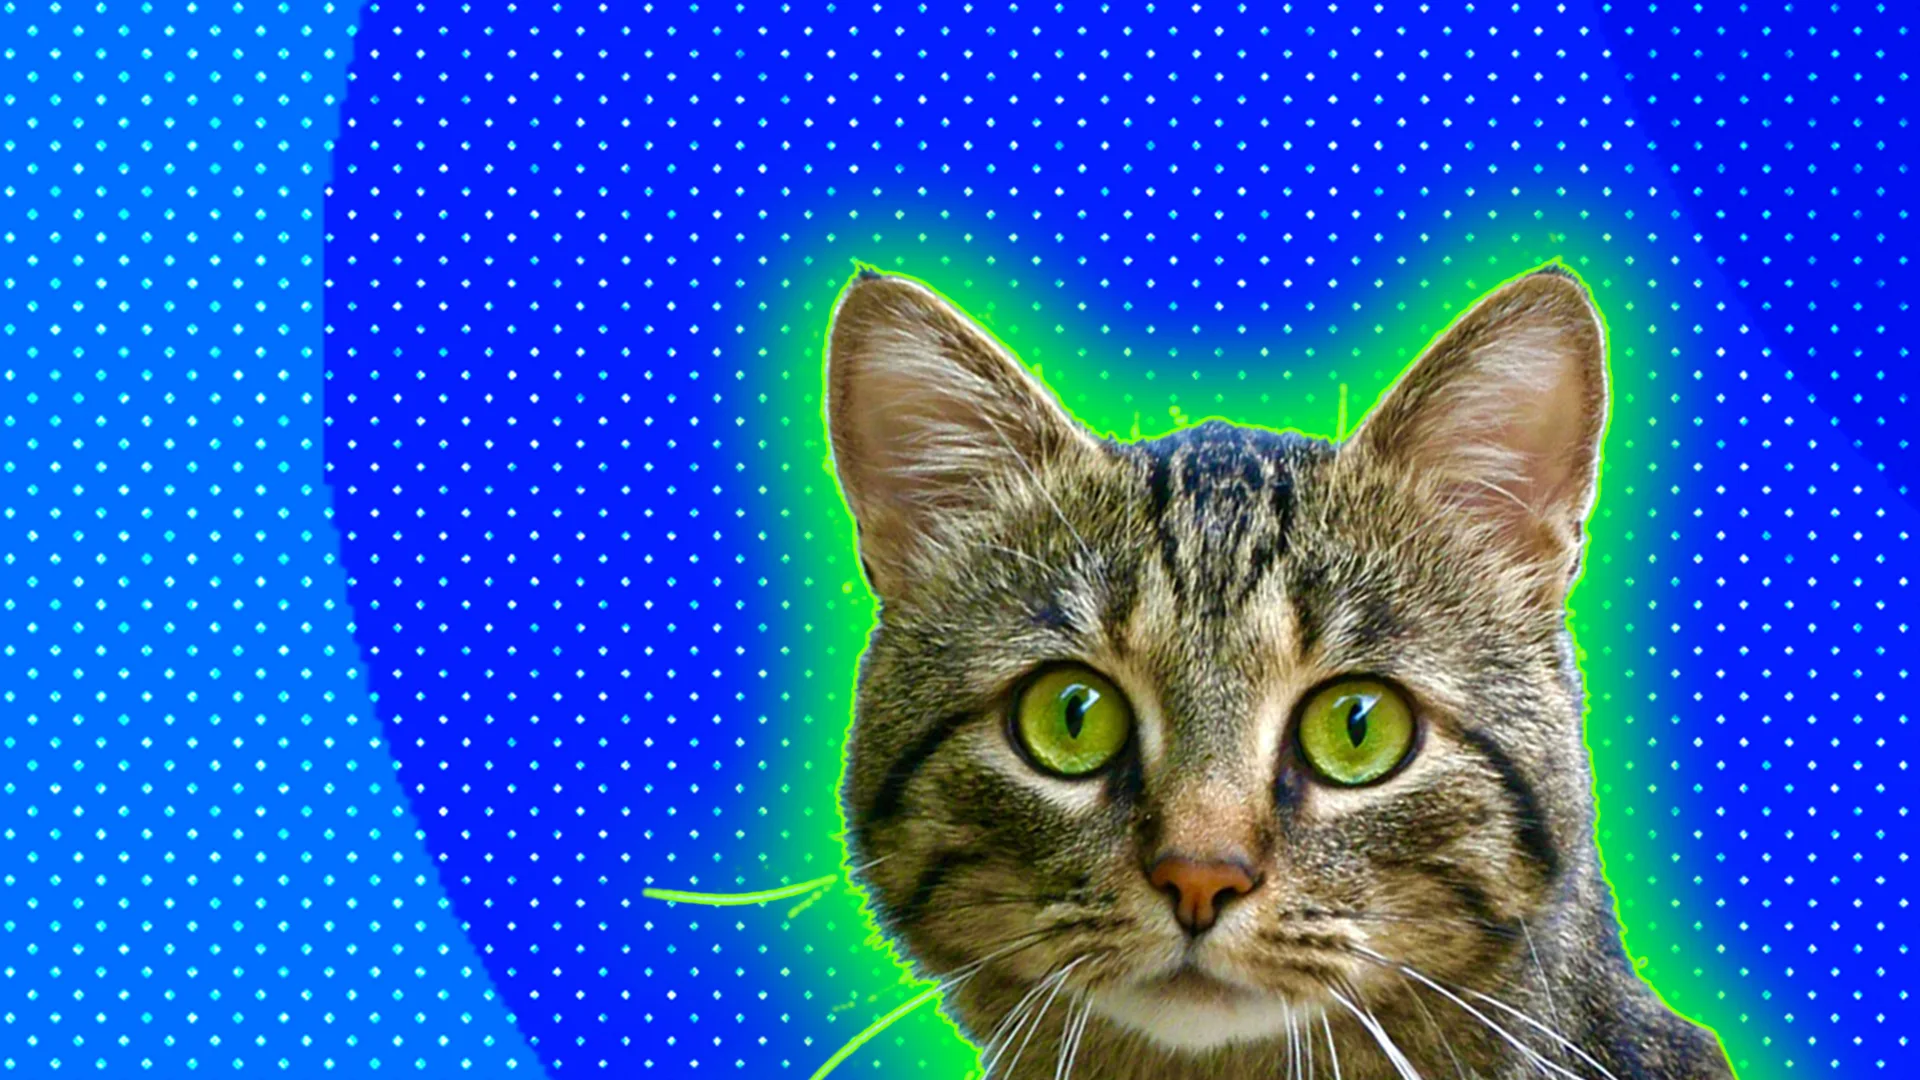 Tabby cat peeks out from the right hand side of the image, against a blue background